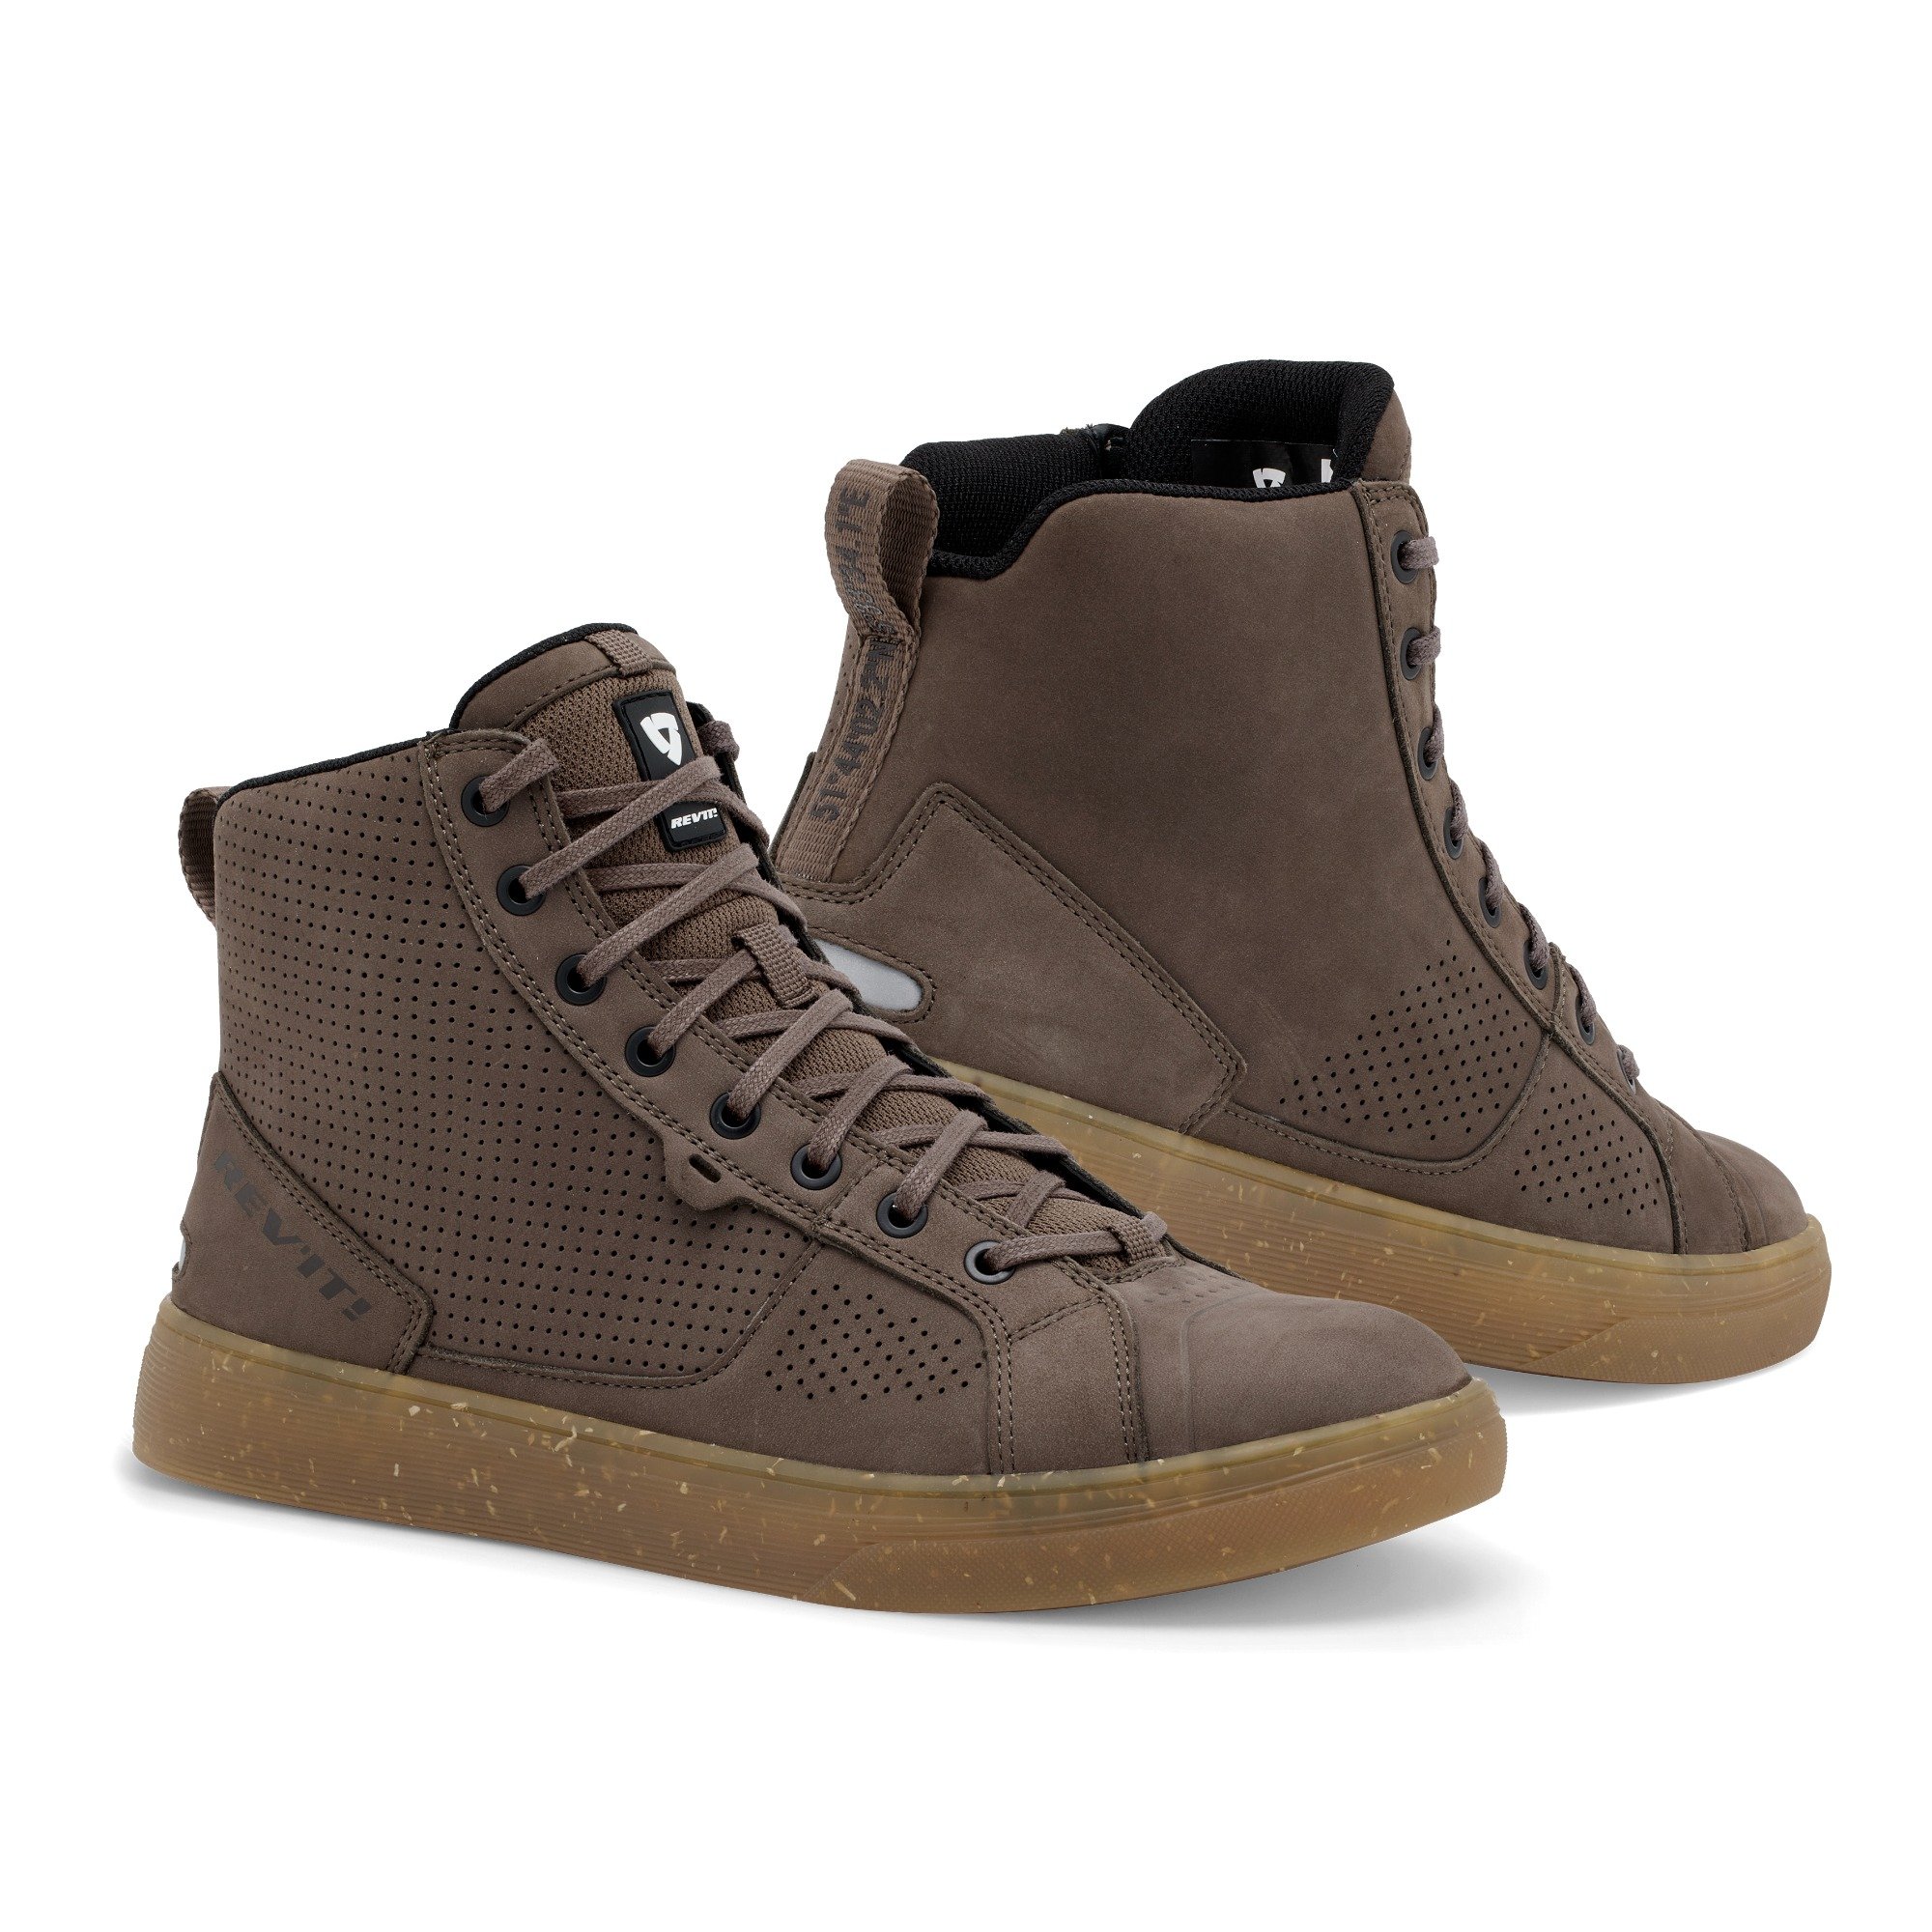 Image of EU REV'IT! Arrow Chaussures Taupe Marron Taille 39